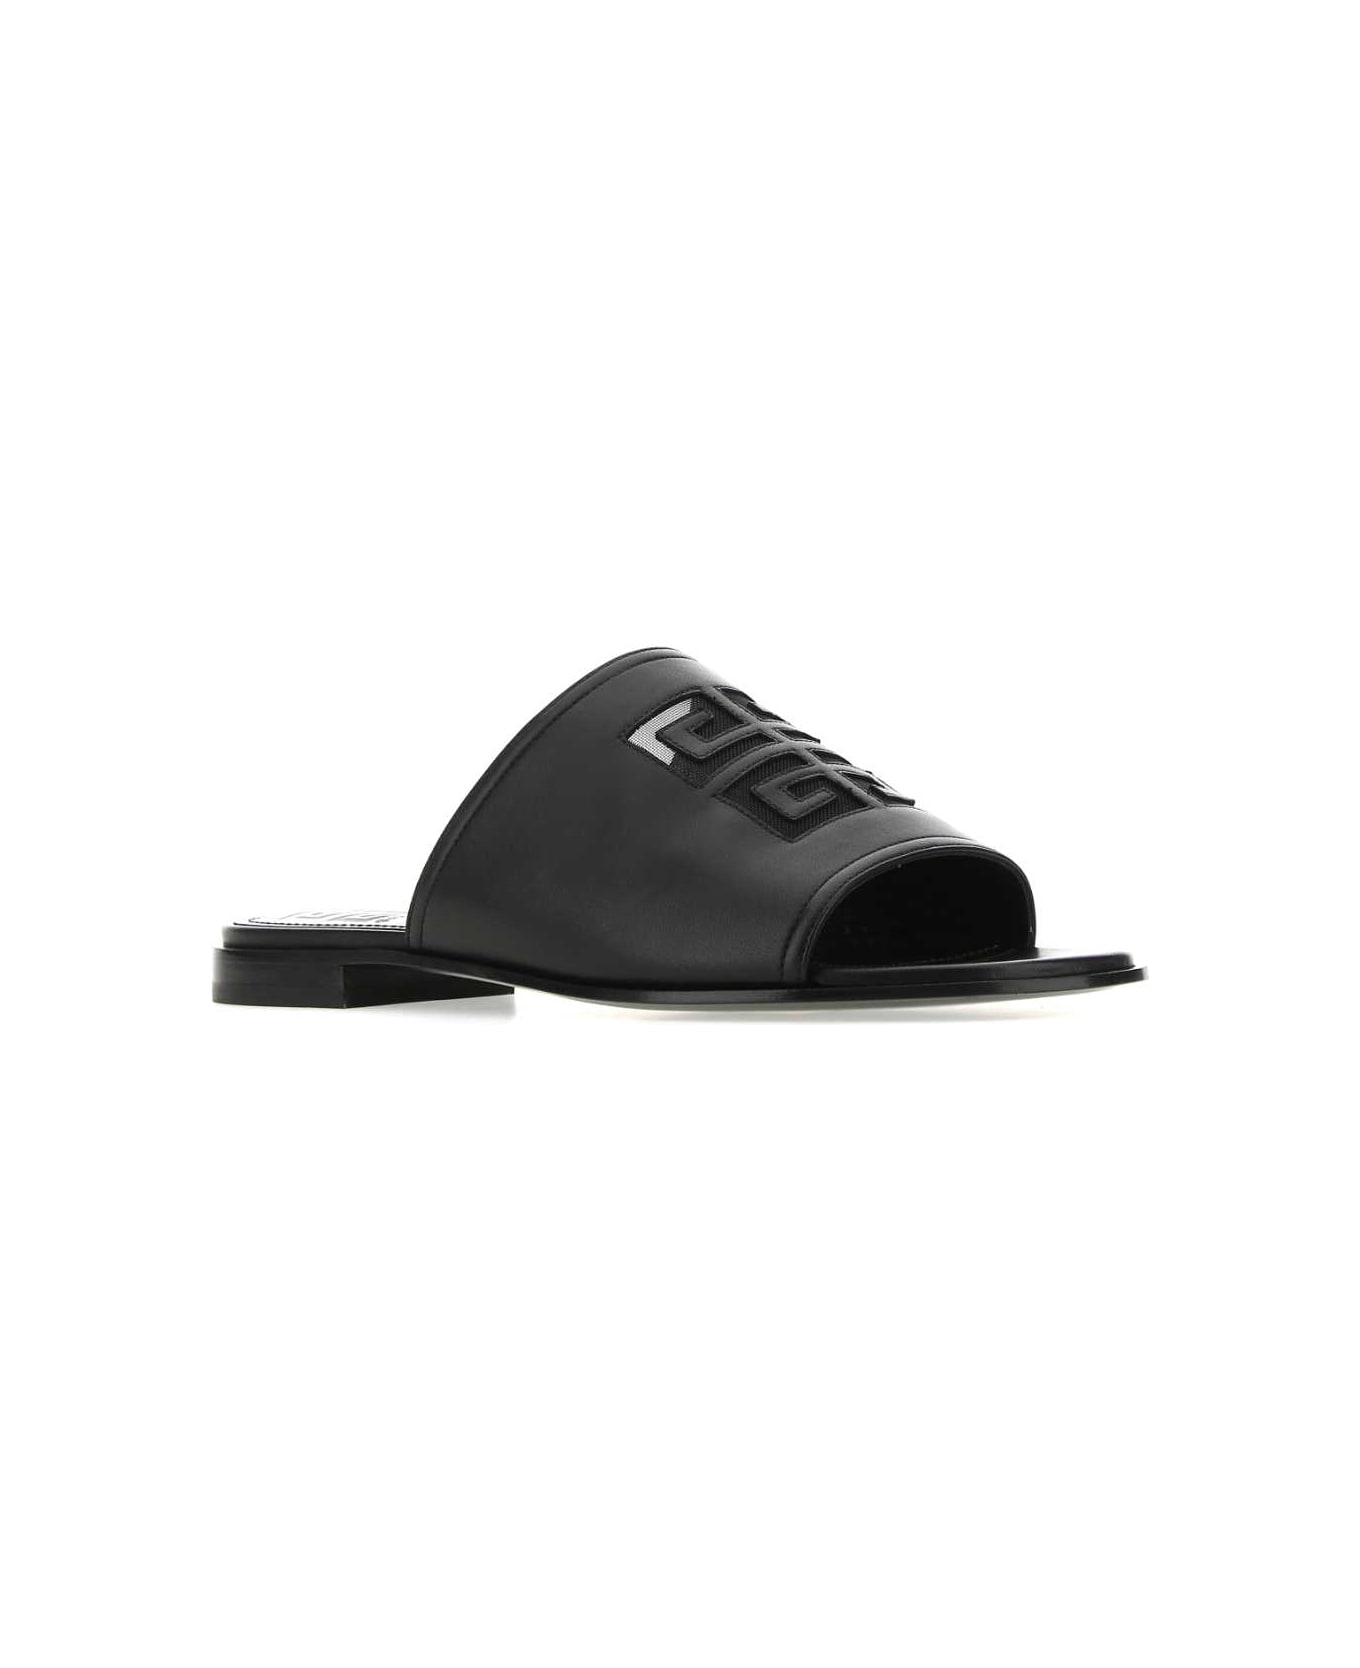 Givenchy Black Nappa Leather 4g Slippers - BLACK